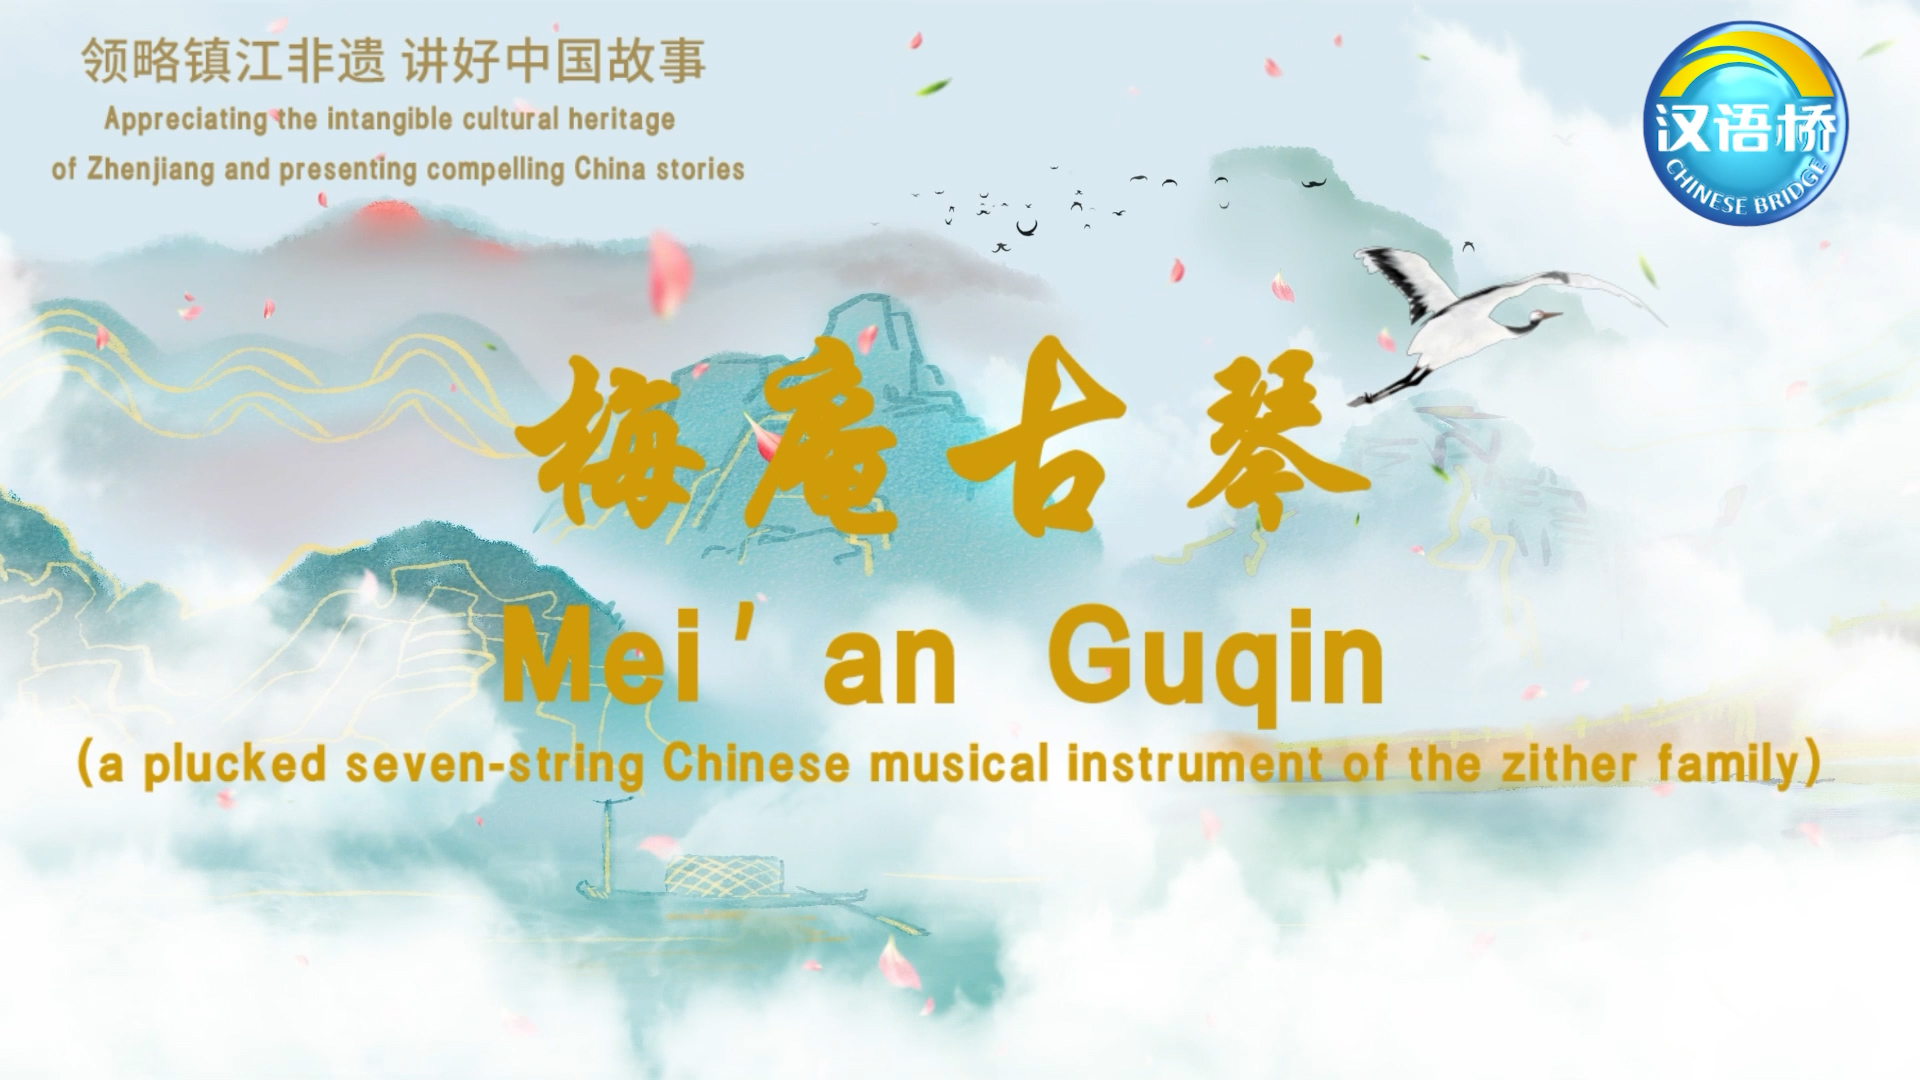 Mei’an Guqin (a plucked seven-string Chinese musical instrument of the zither family)